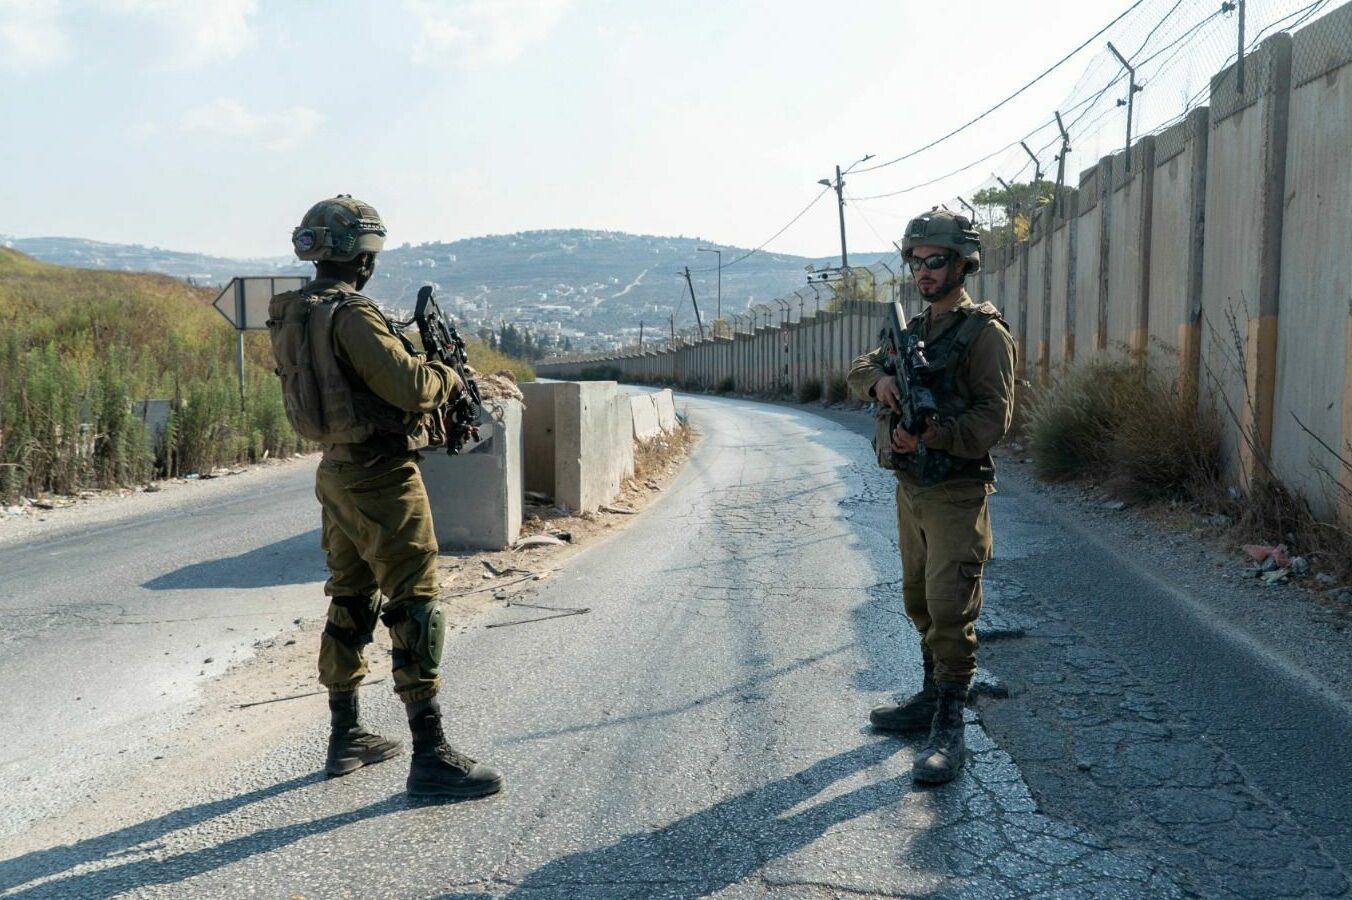 Two Israeli Soldiers Wounded In Drive-By Shooting Attack In Occupied West Bank (Videos)